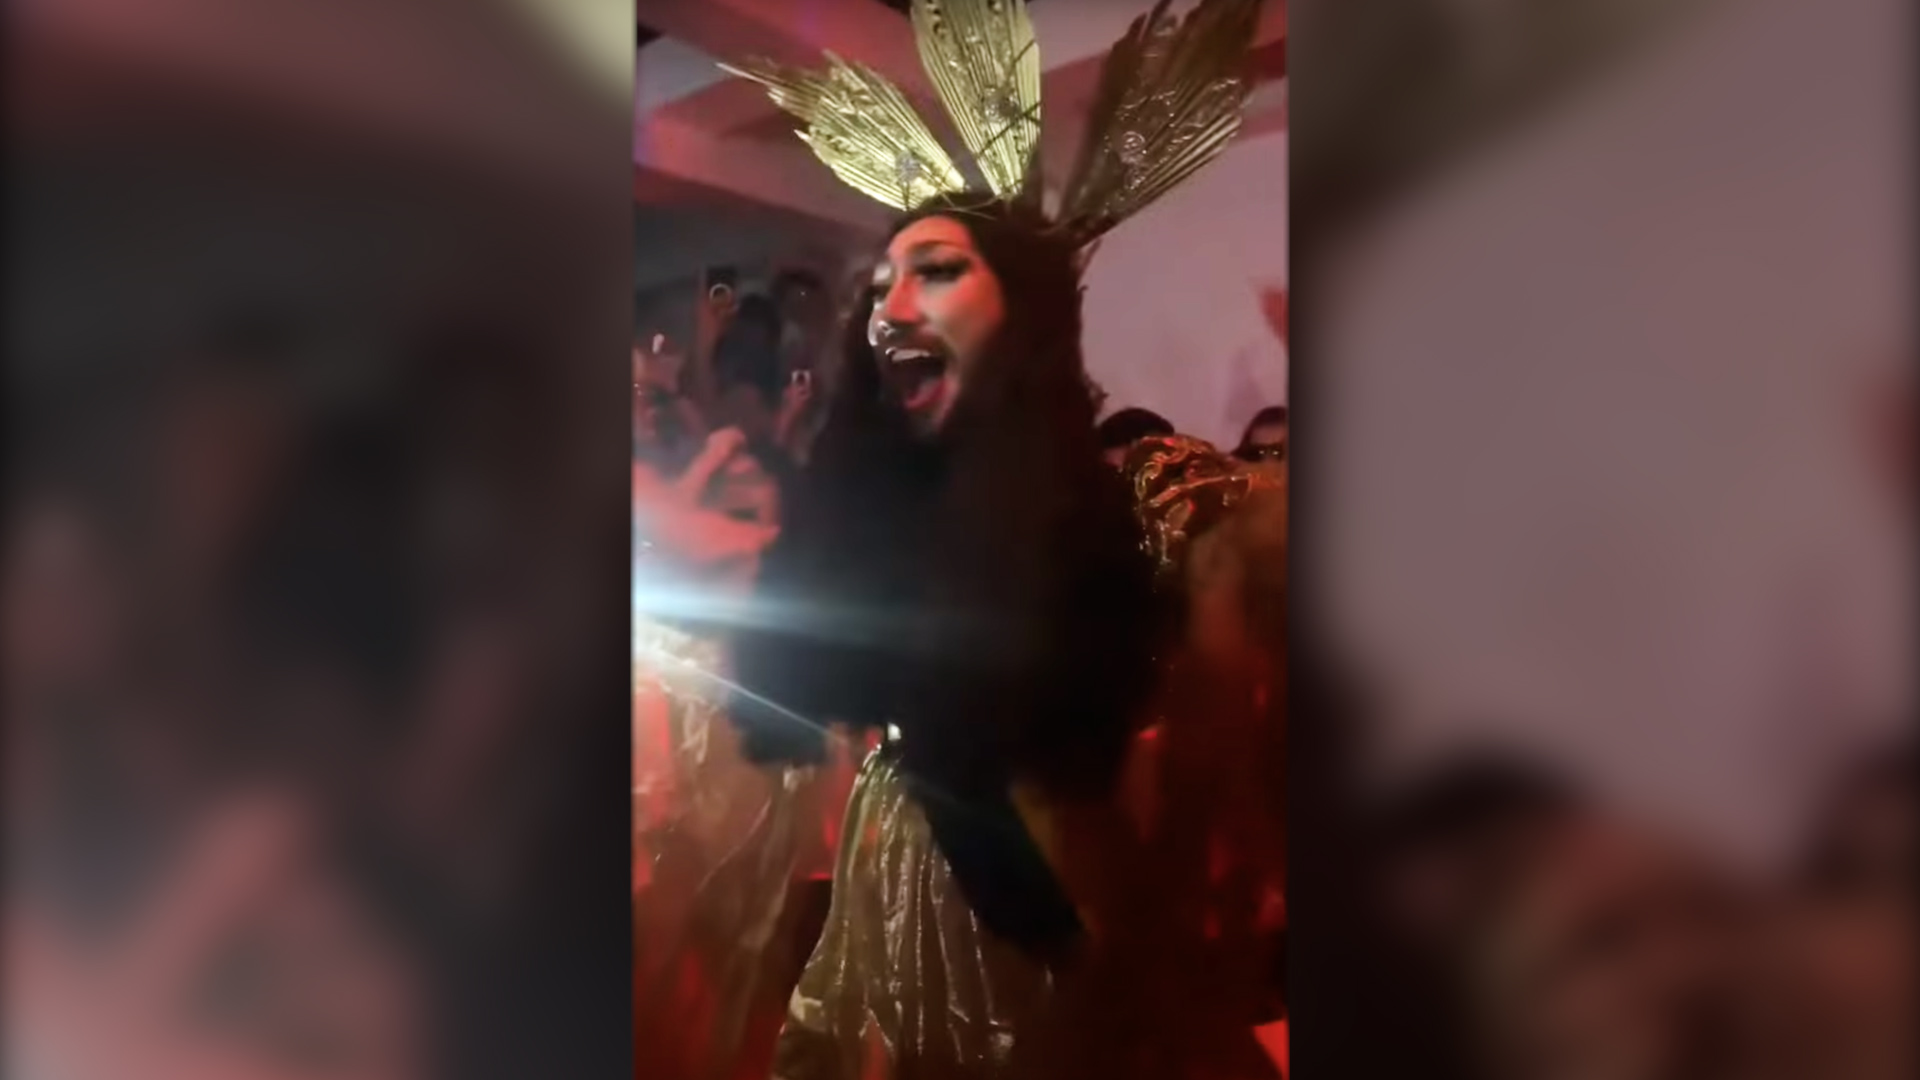 Philippine drag culture is on the rise, but will it usher in LGBTQ